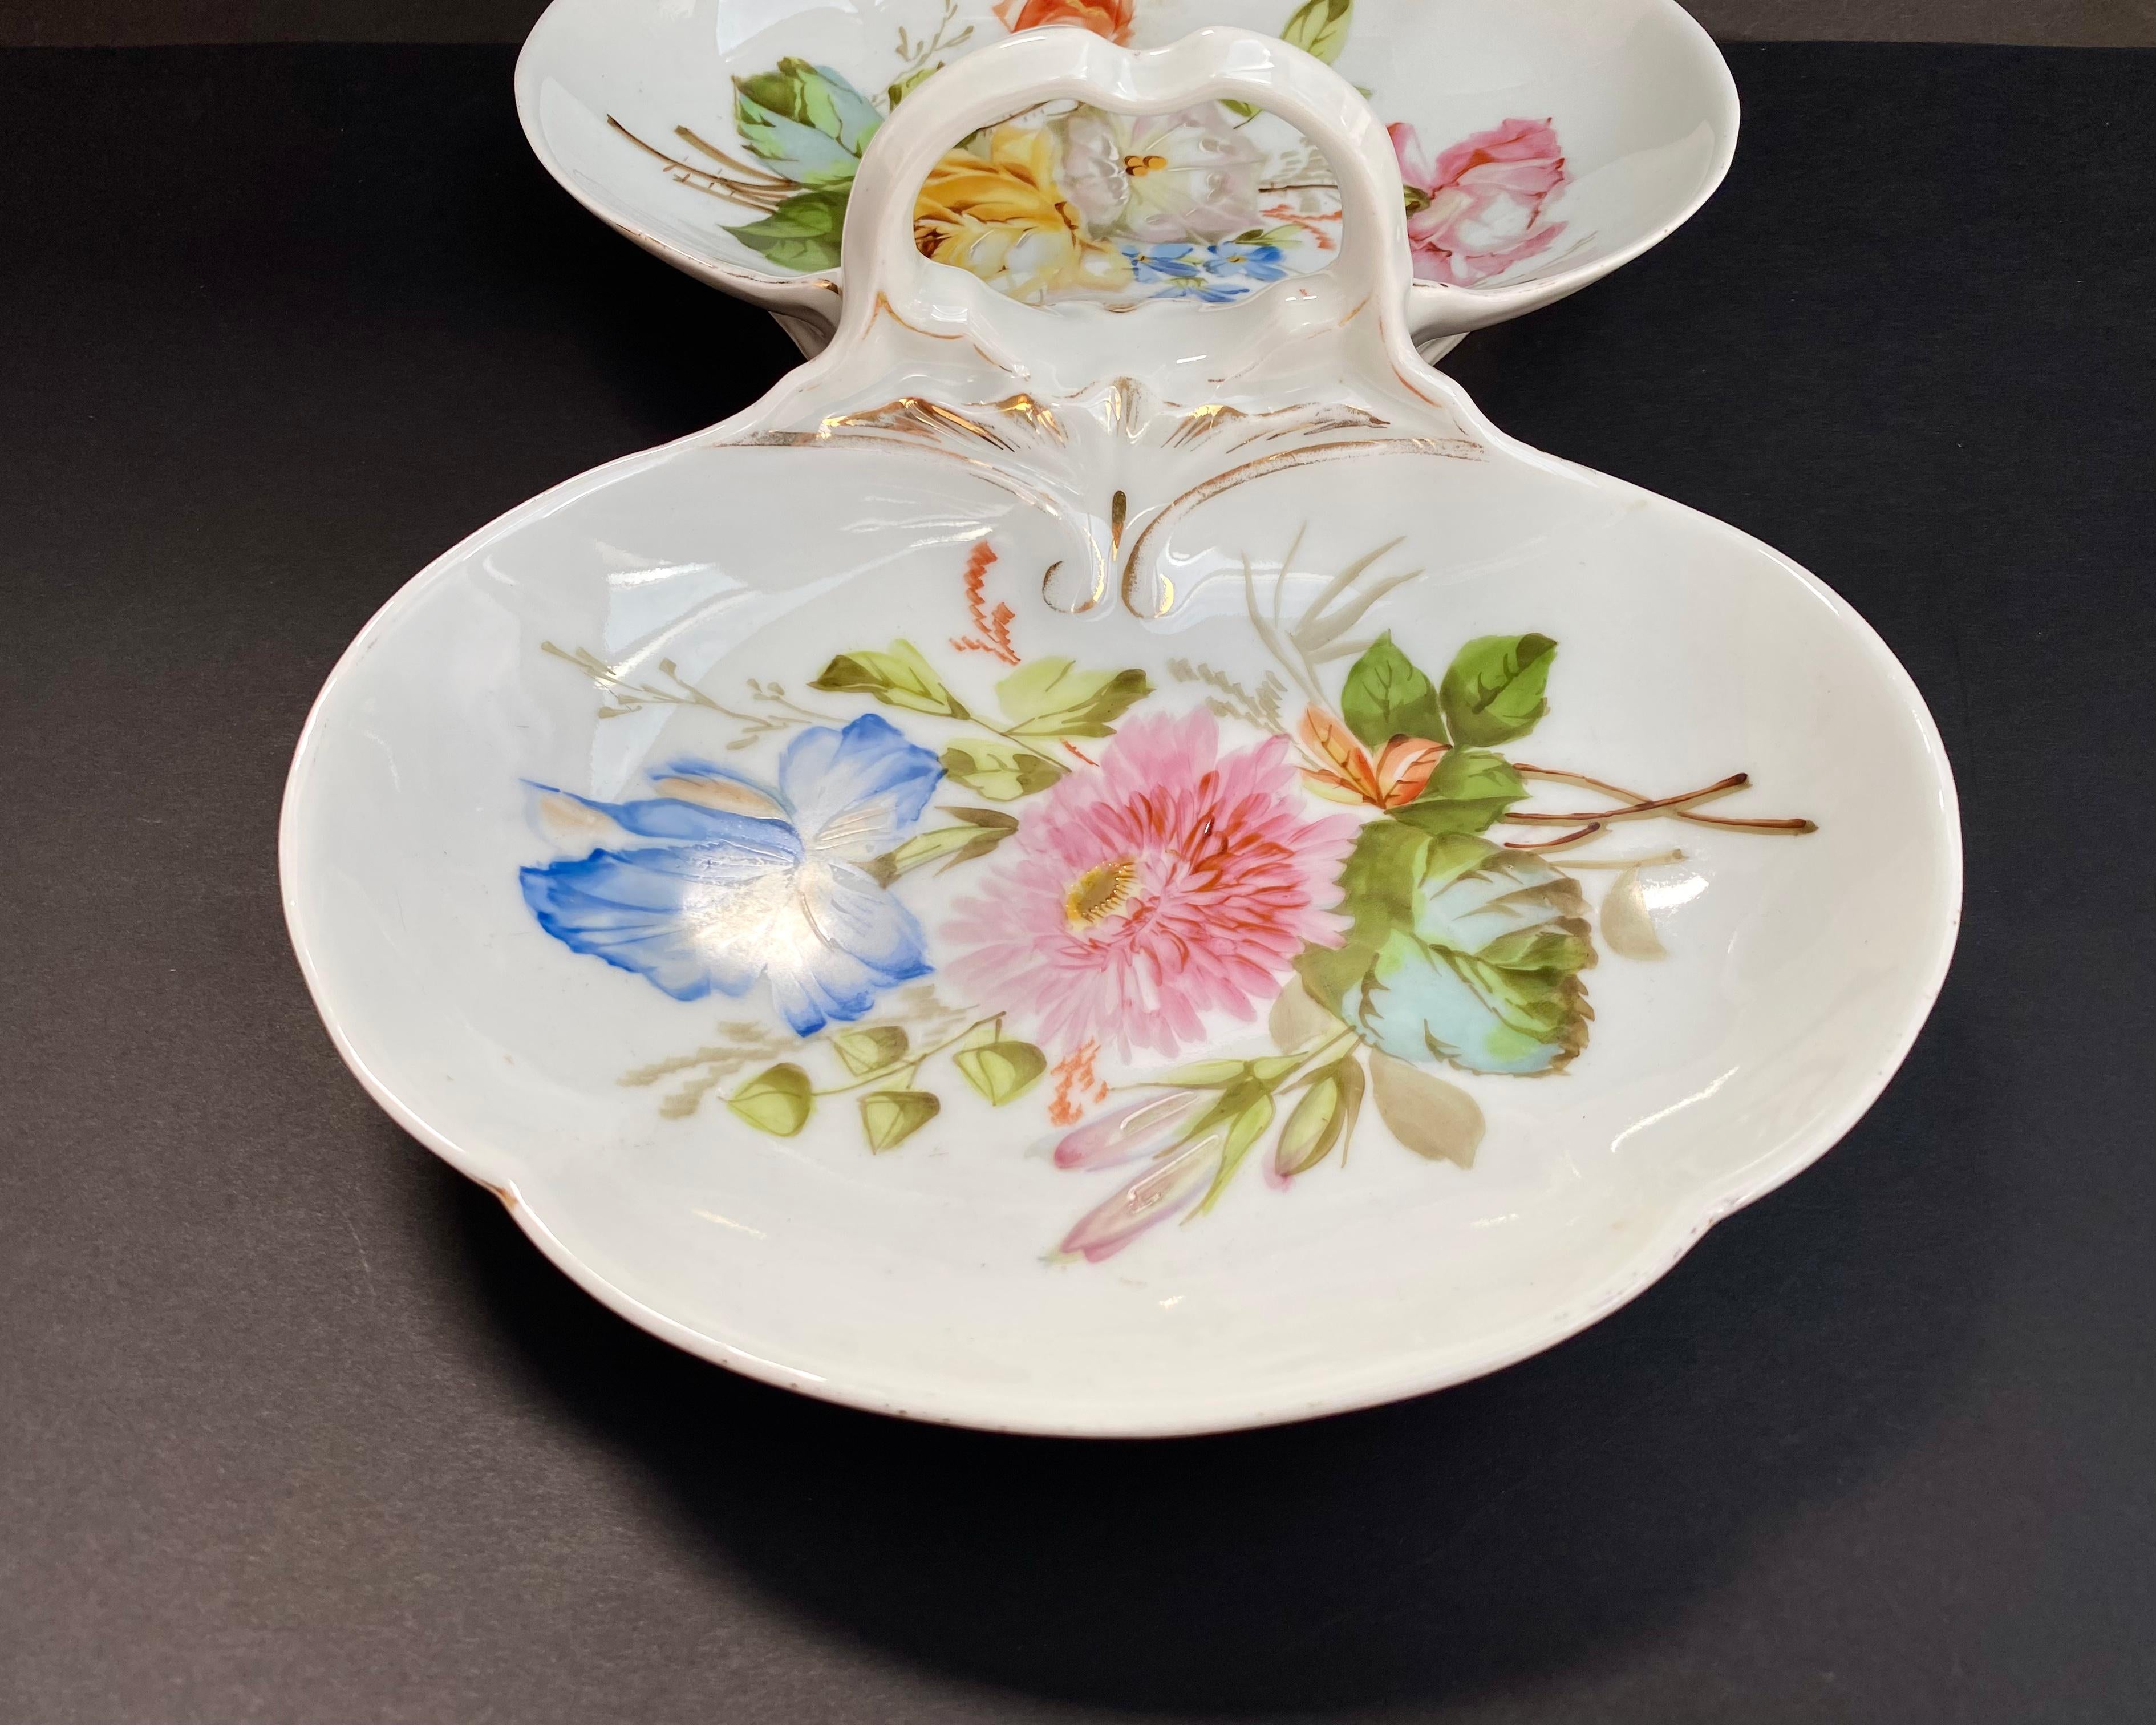 Porcelain Luxurious Large Serving Plate With Two Sections, France, 1920s